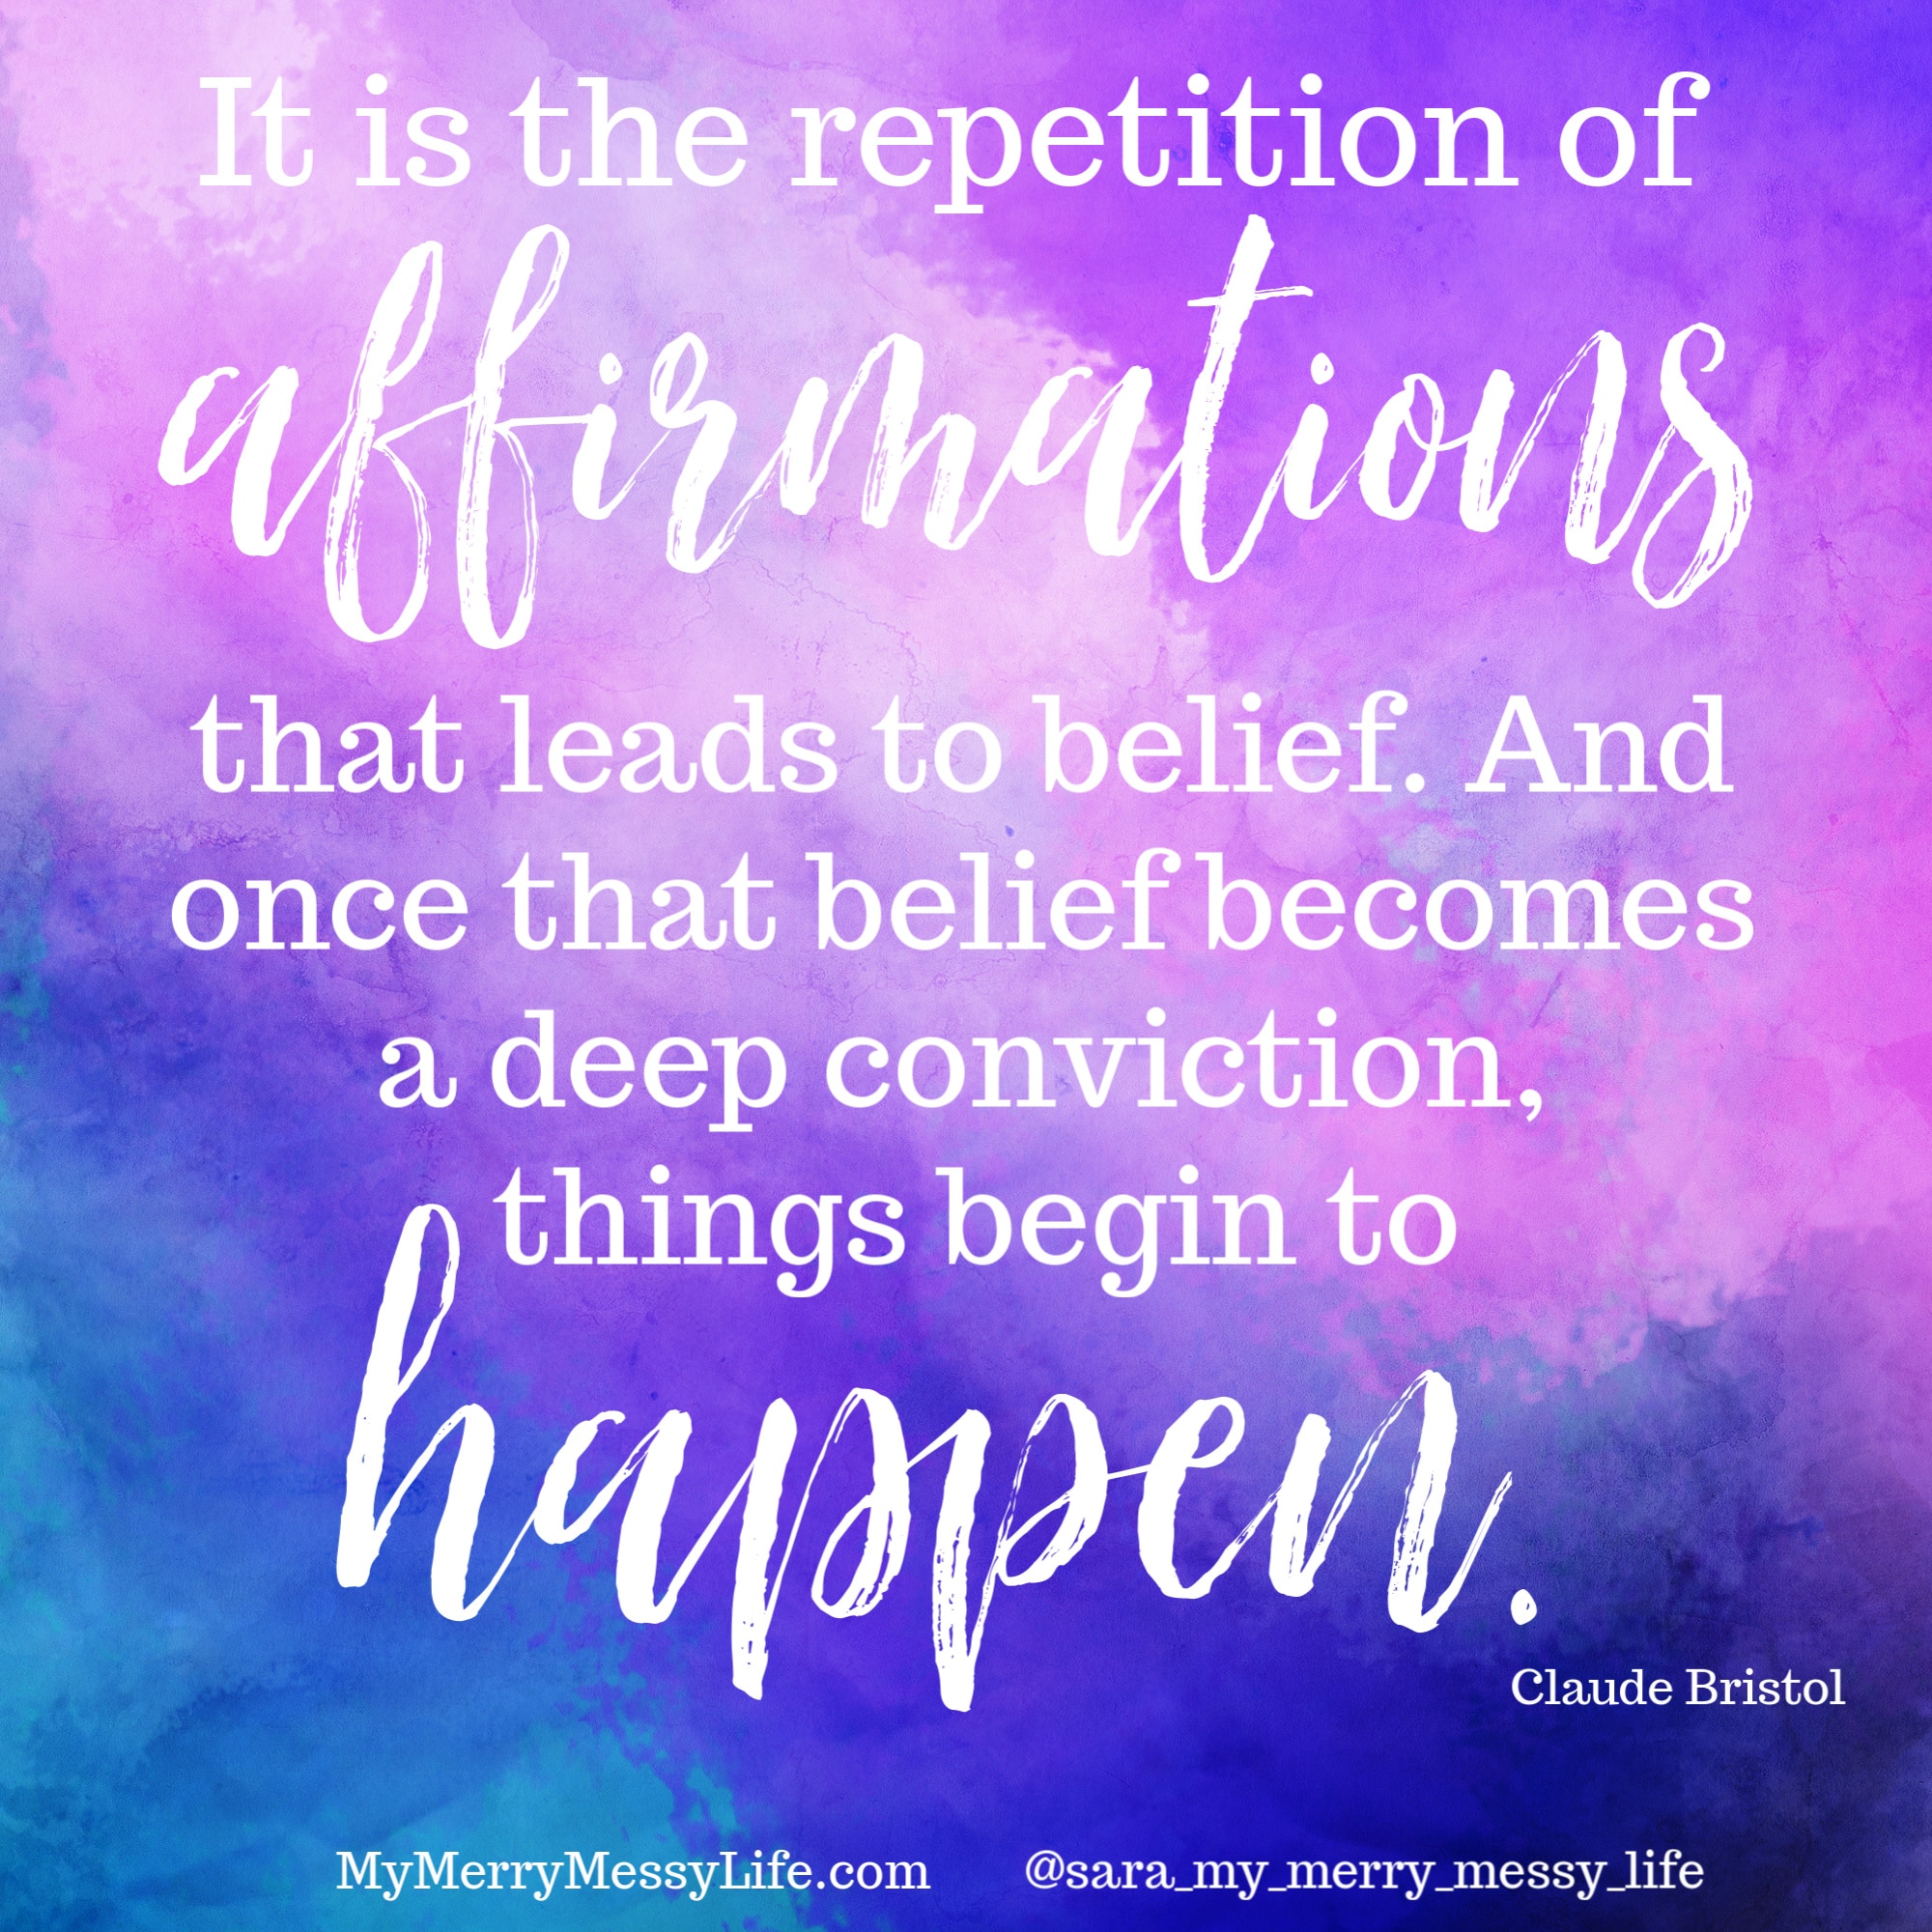 It is the repetition of affirmations that leads to belief. And once that belief becomes a deep conviction, things begin to happen. - Claude Bristol || MyMerryMessyLife.com